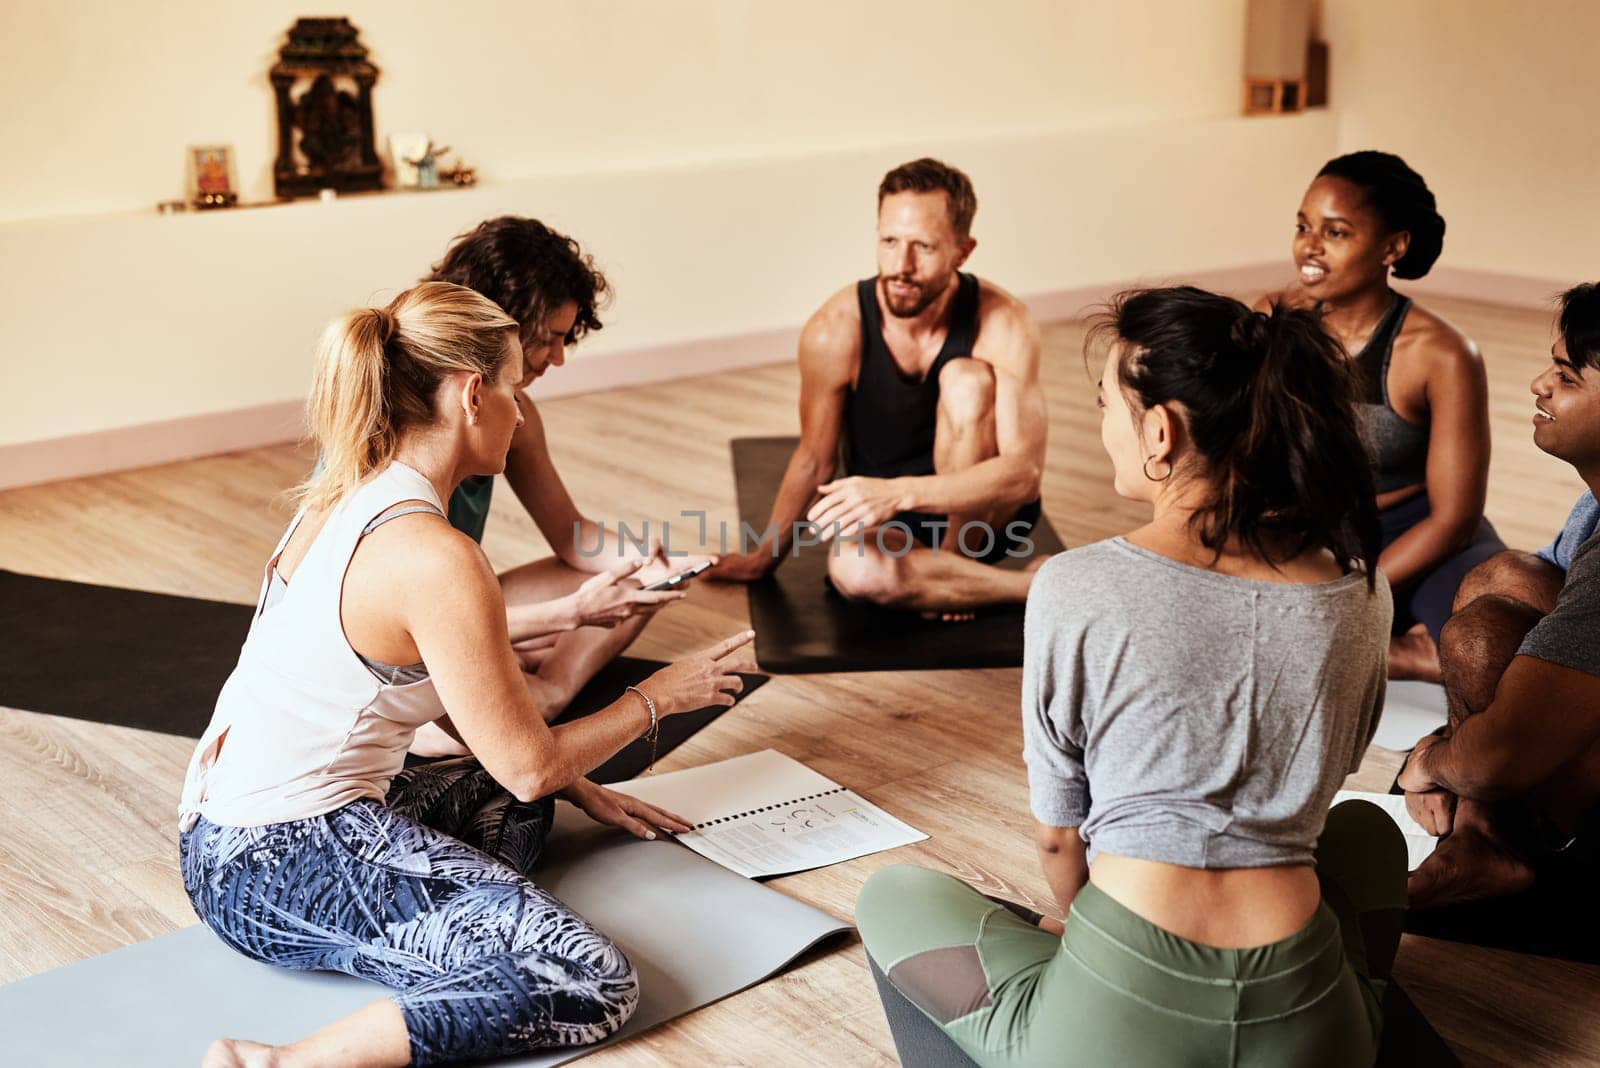 Yoga is even better shared with friends. a group of young men and women chatting during a yoga class